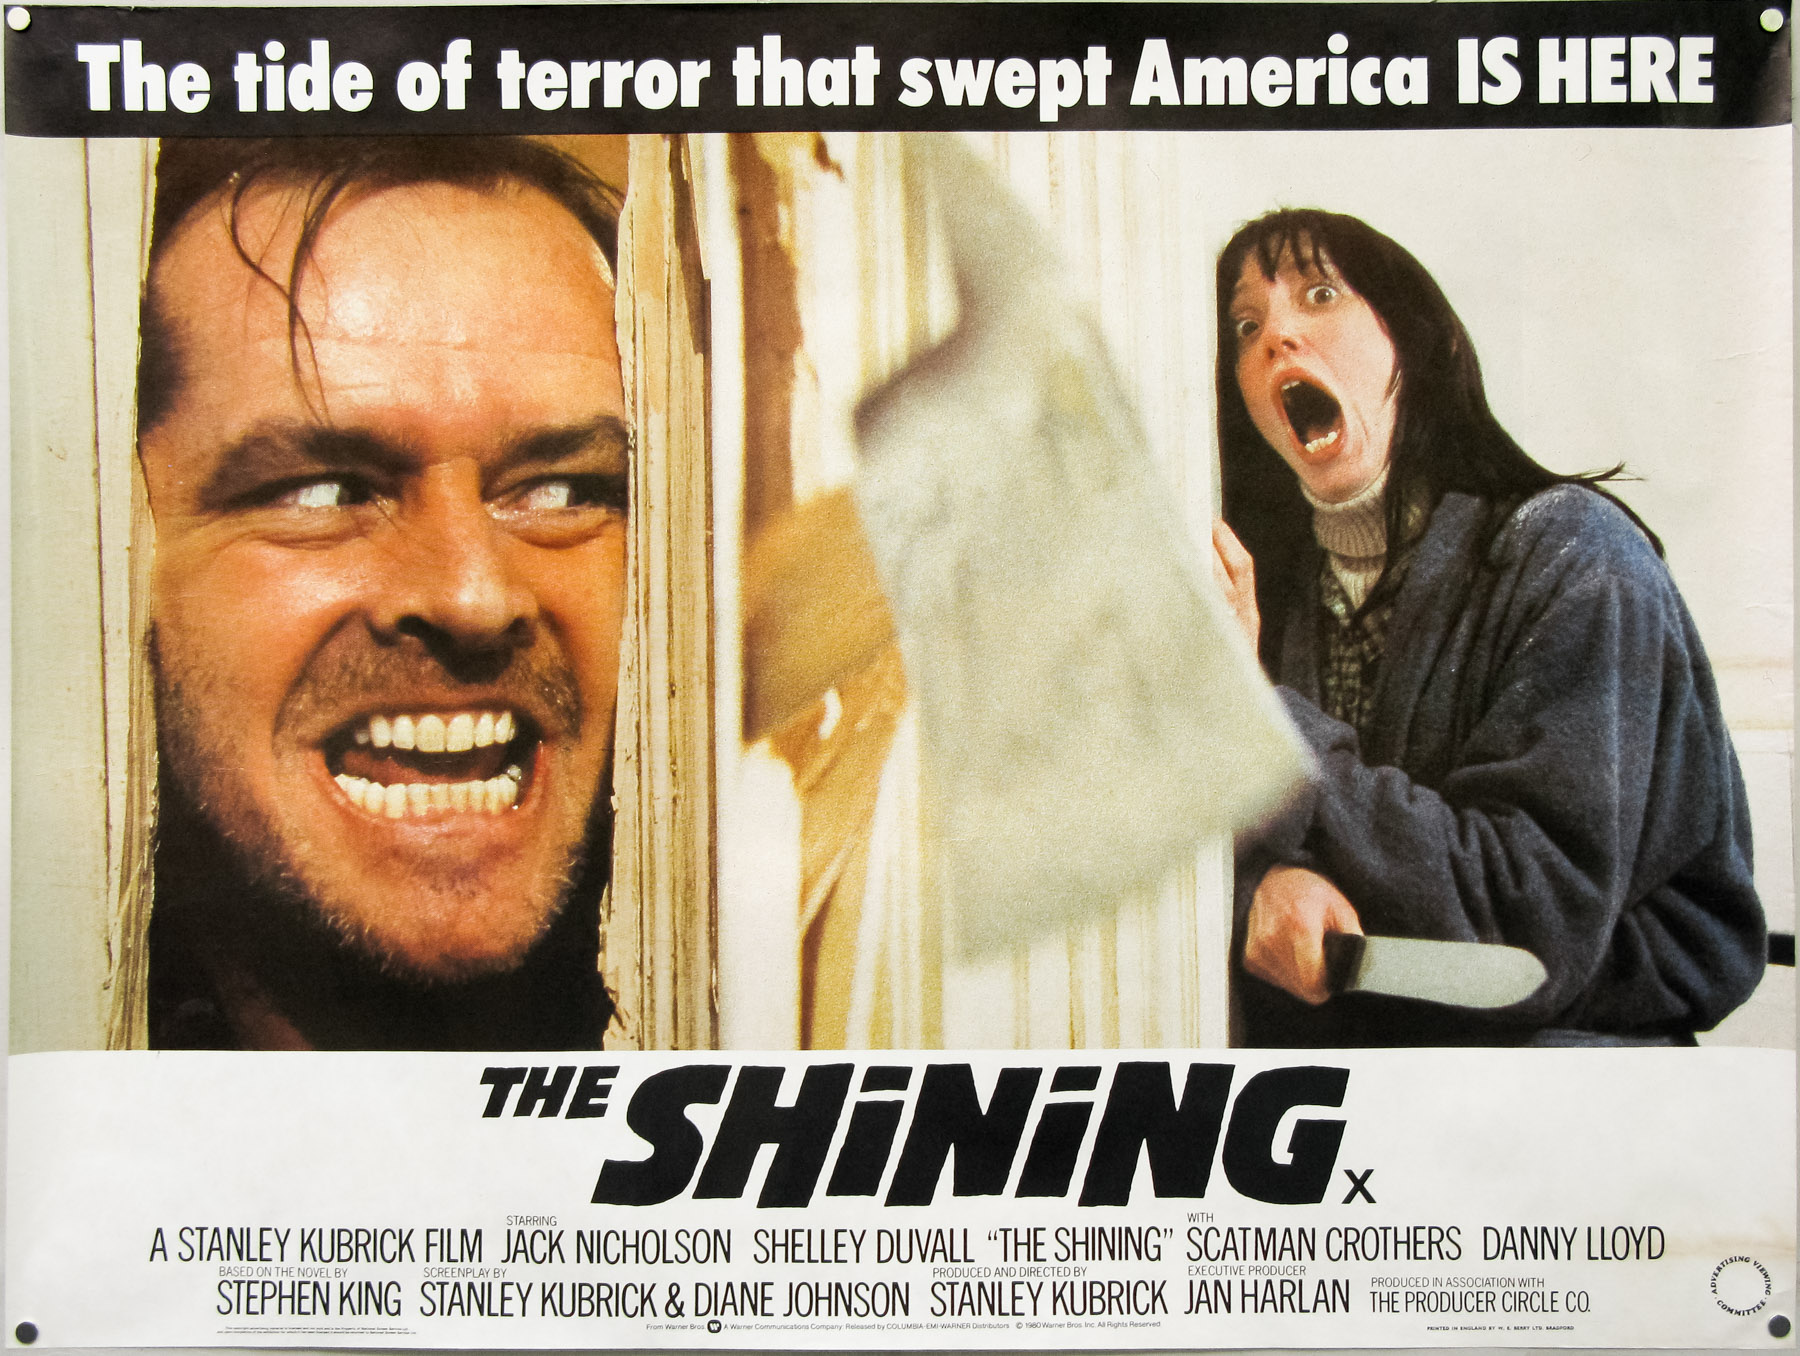 The UK quad for Stanley Kubrick's The Shining, designed by Chapman Beauvais in close collaboration with the director, 1980.